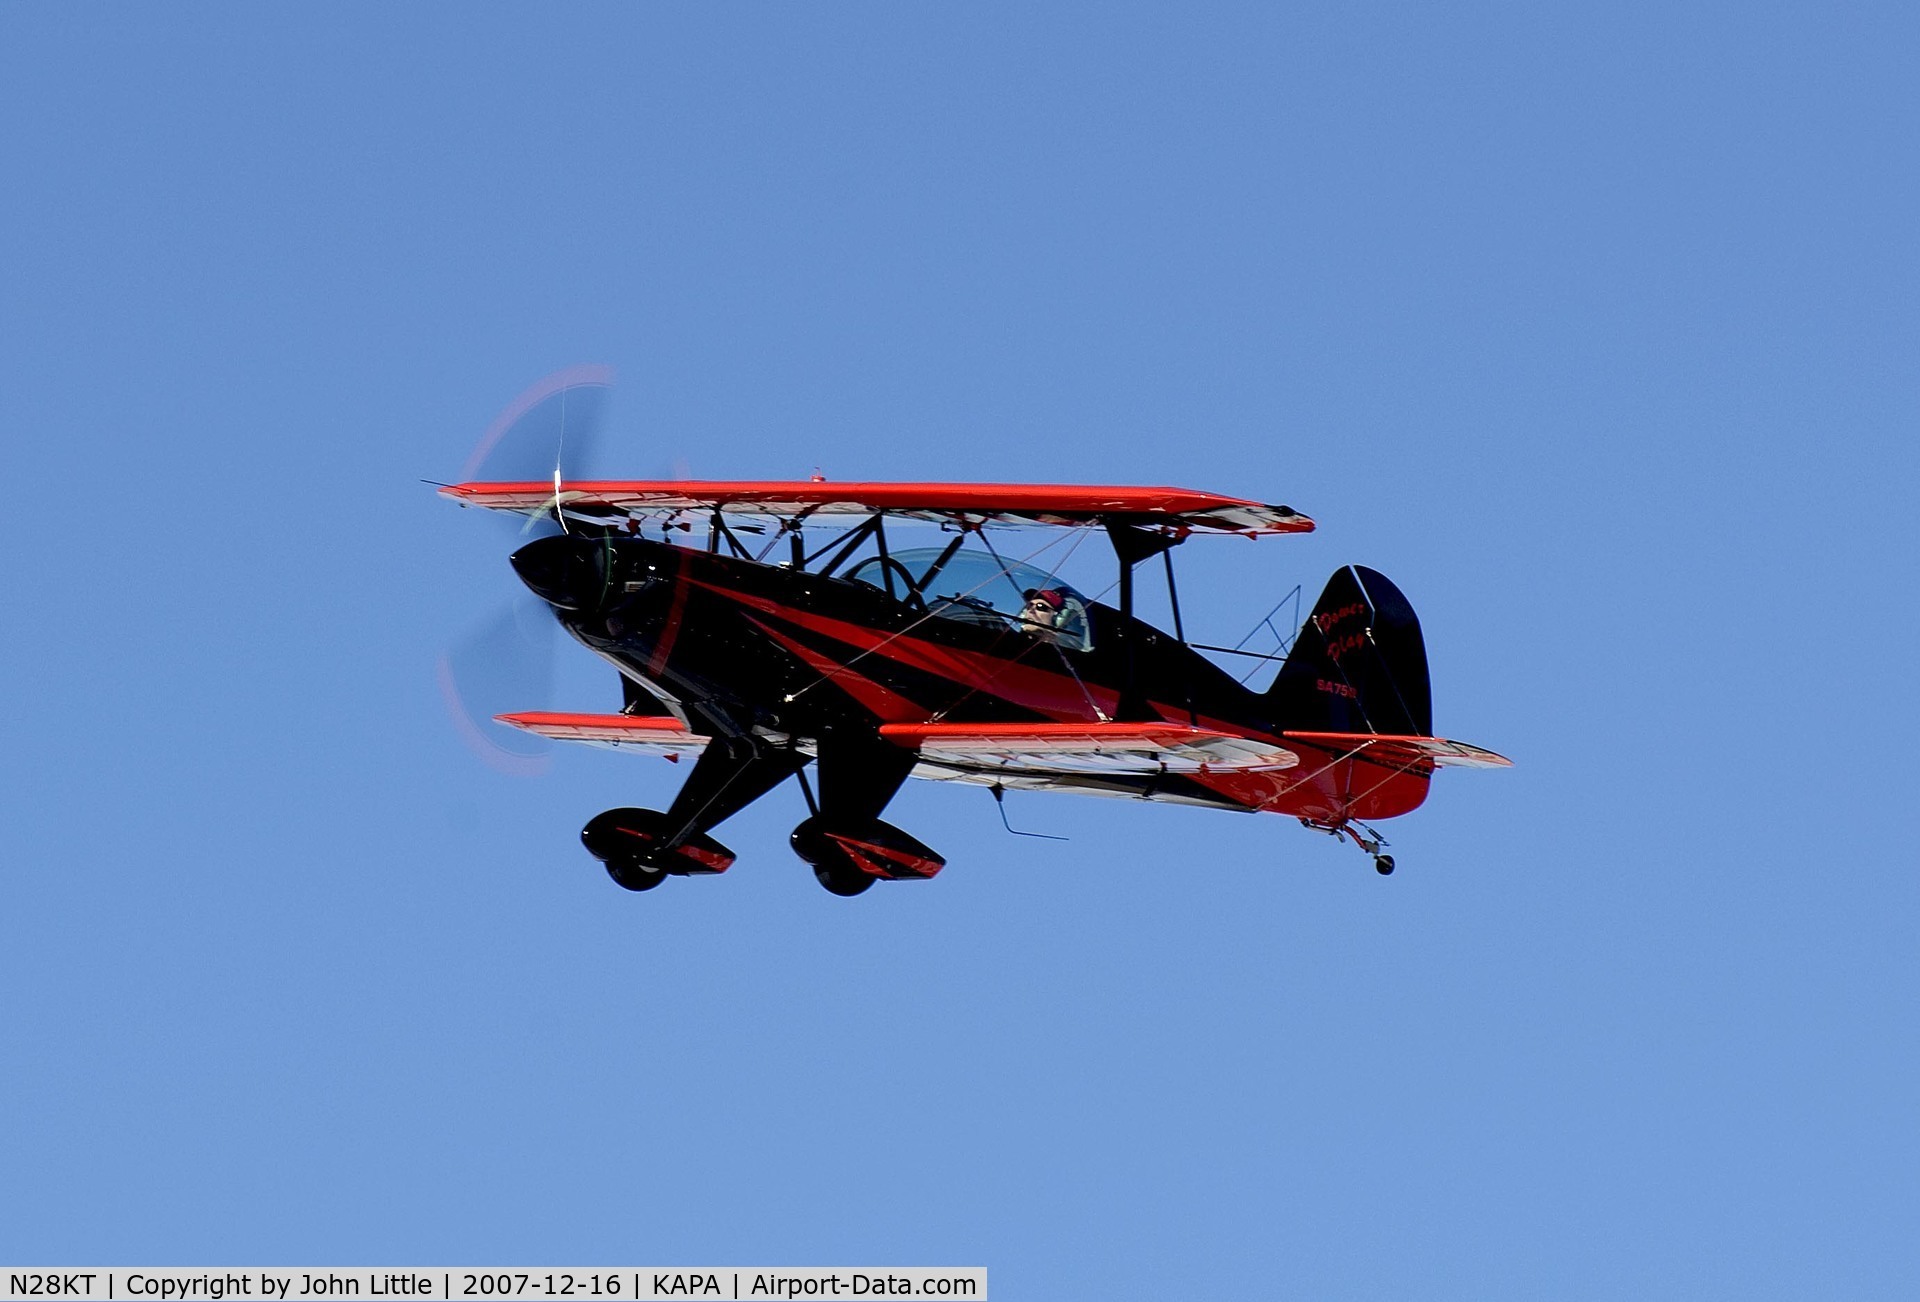 N28KT, 2005 Stolp SA-750 Acroduster Too C/N 0028, Approach to 17L